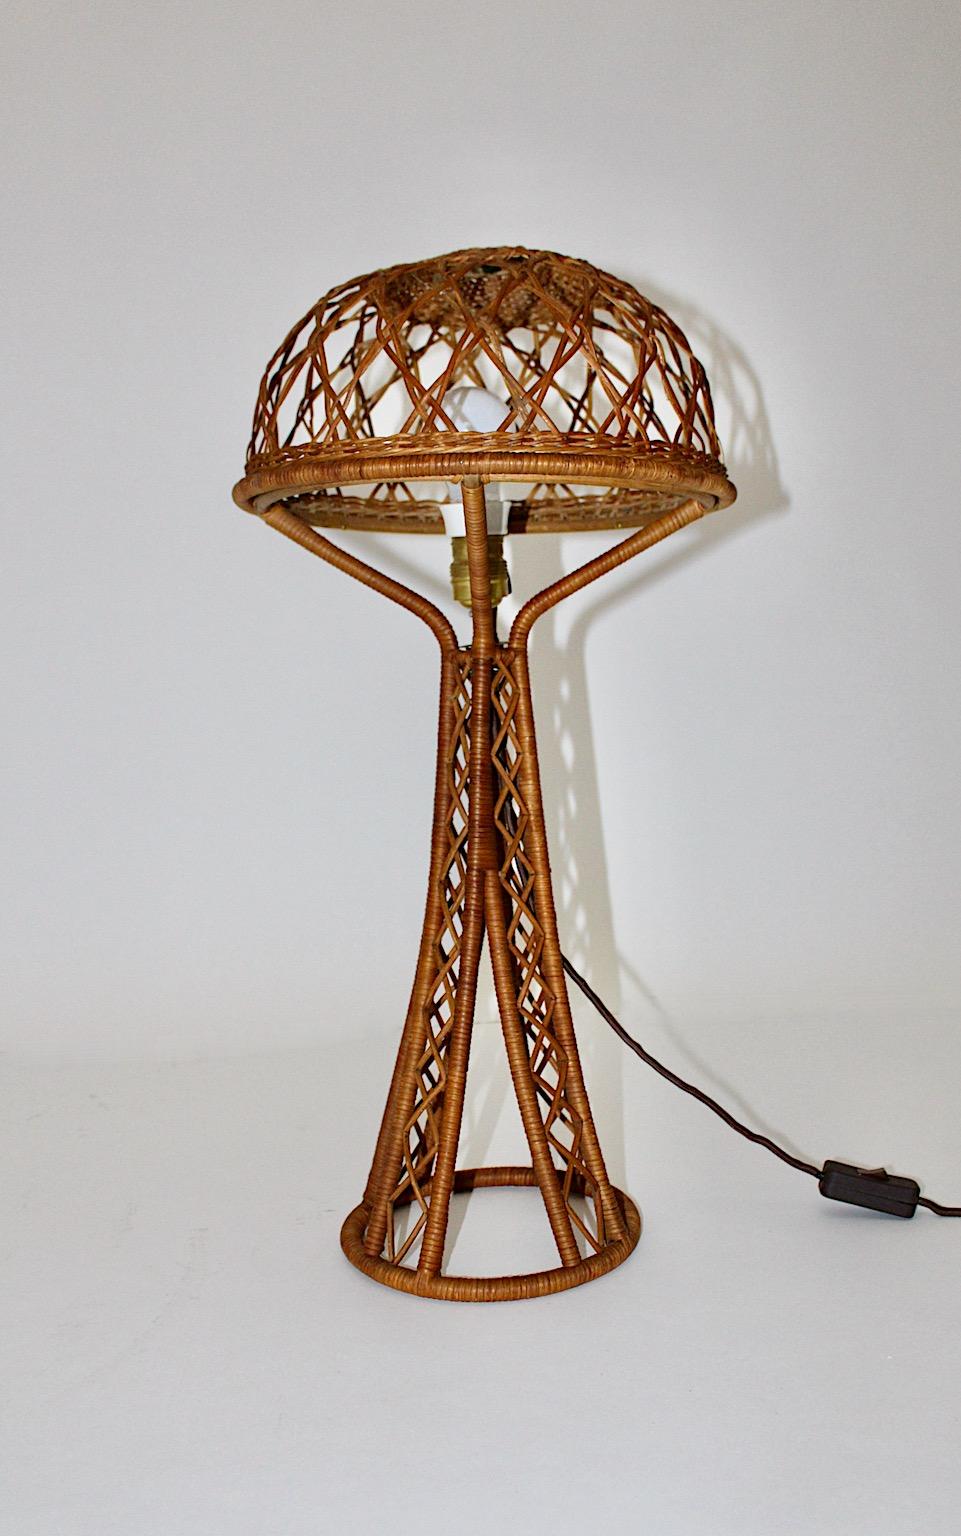 Mid Century Modern vintage organic table lamp Eiffel with mushroom like shade from rattan 1950s.
While the delicate lamp shade from rattan shows delicate rhomboid pattern the lamp base features an Eiffel like shape.
The organic modern rattan work